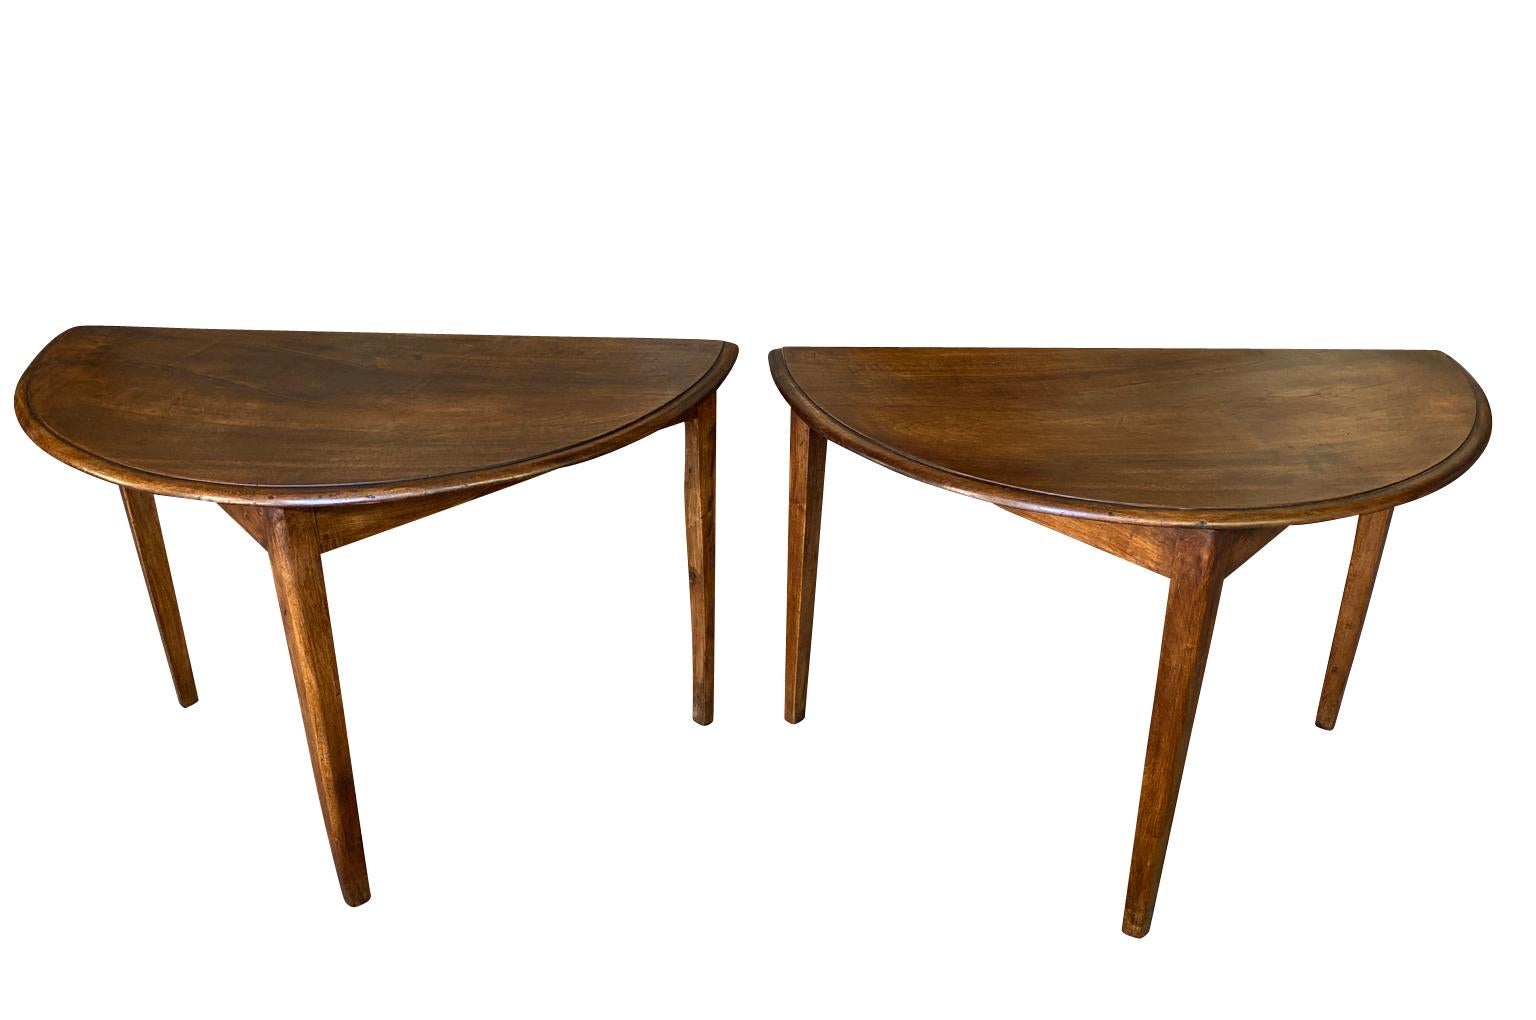 A very handsome late 19th century pair of Demi Lune Console Tables from Spain.  Beautifully constructed with very minimalist lines from walnut.  